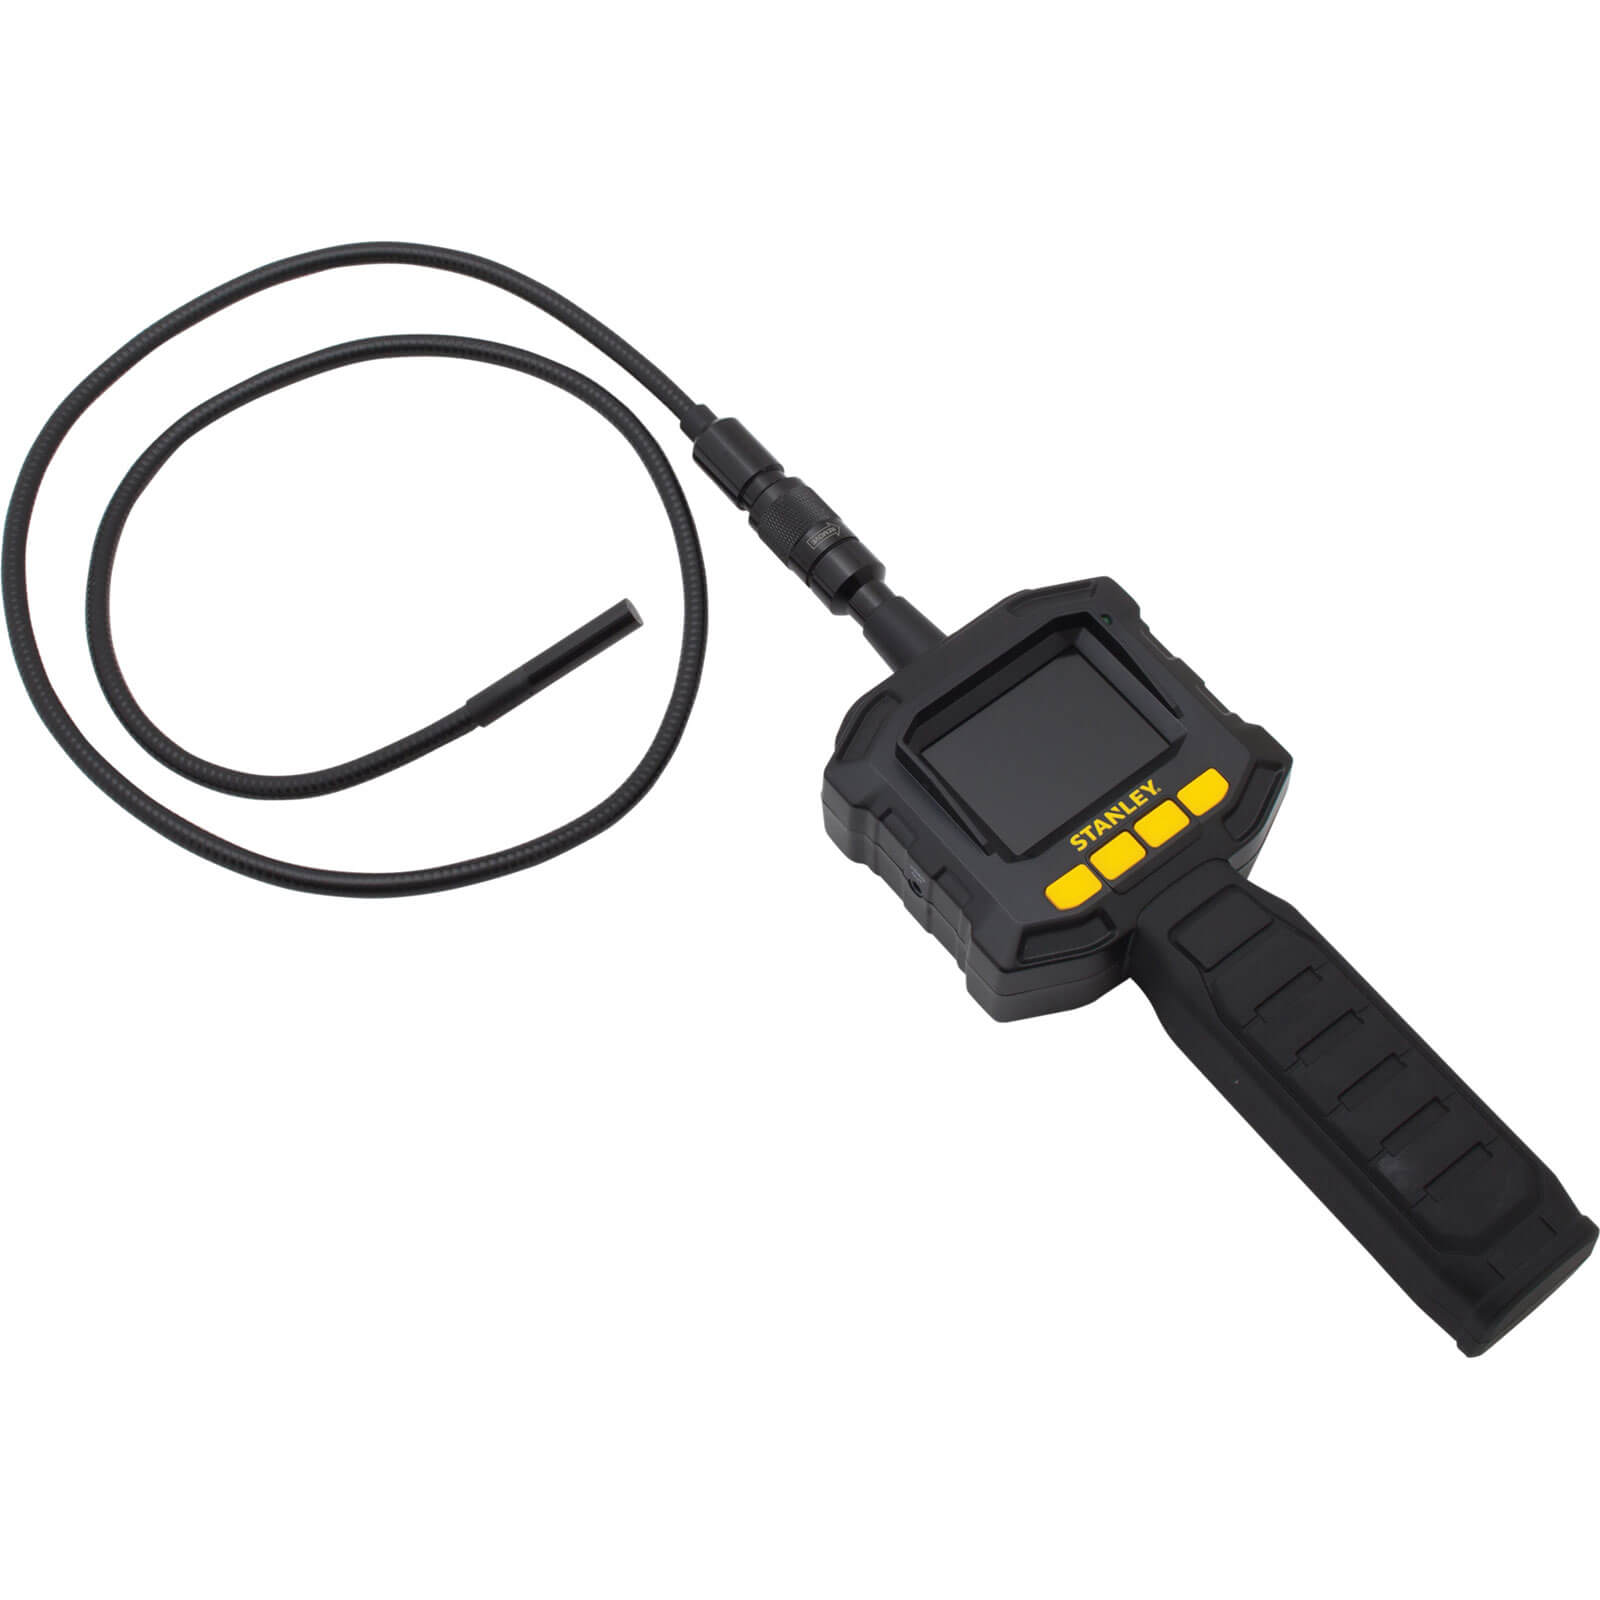 Image of Stanley Intelli Tools Inspection Camera